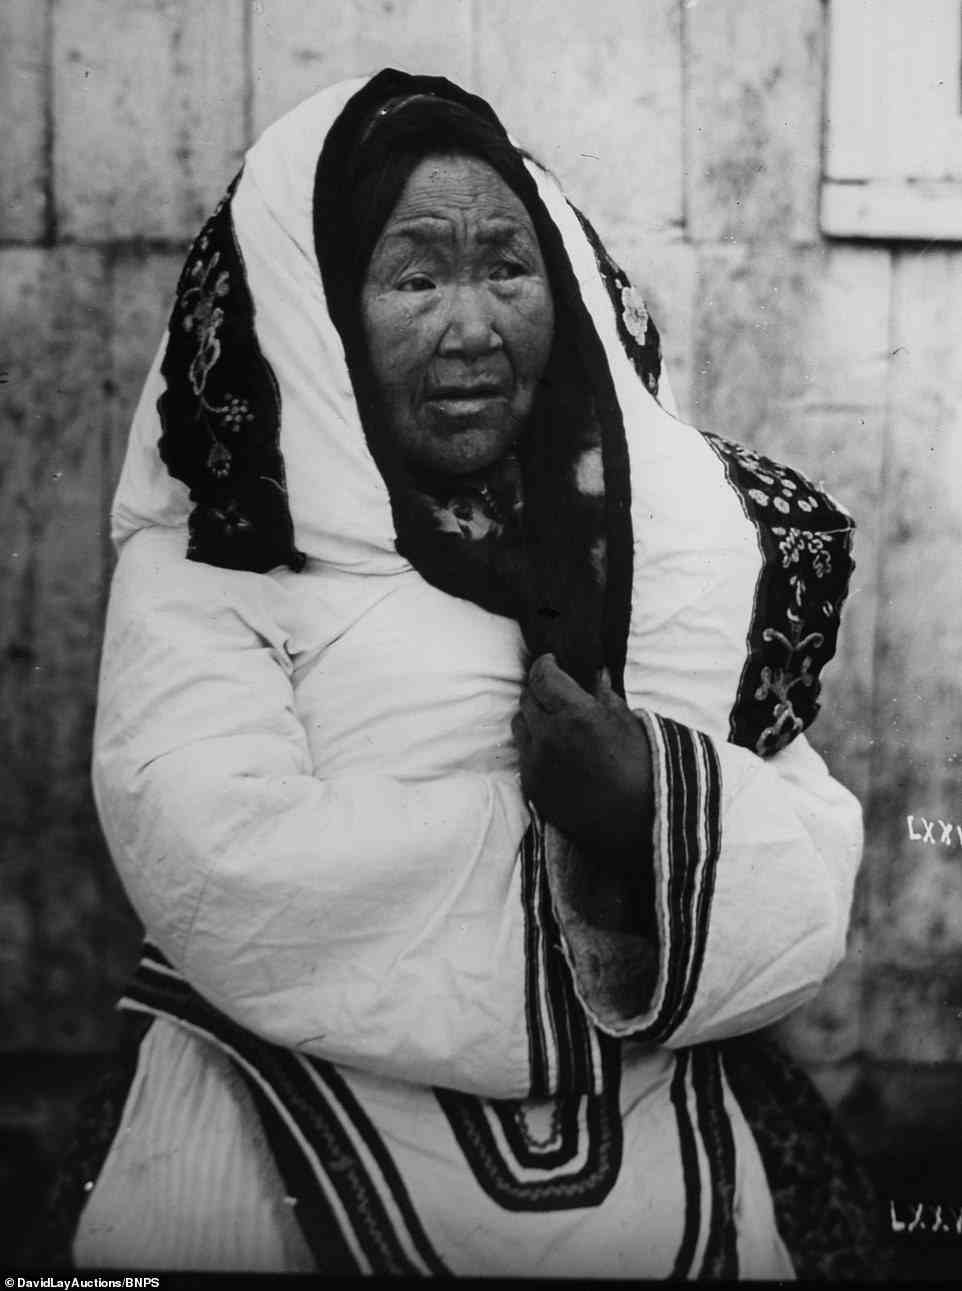 Pictured: An Inuit elder wraps up against the cold in Newfoundland and Labrador during the 19th century